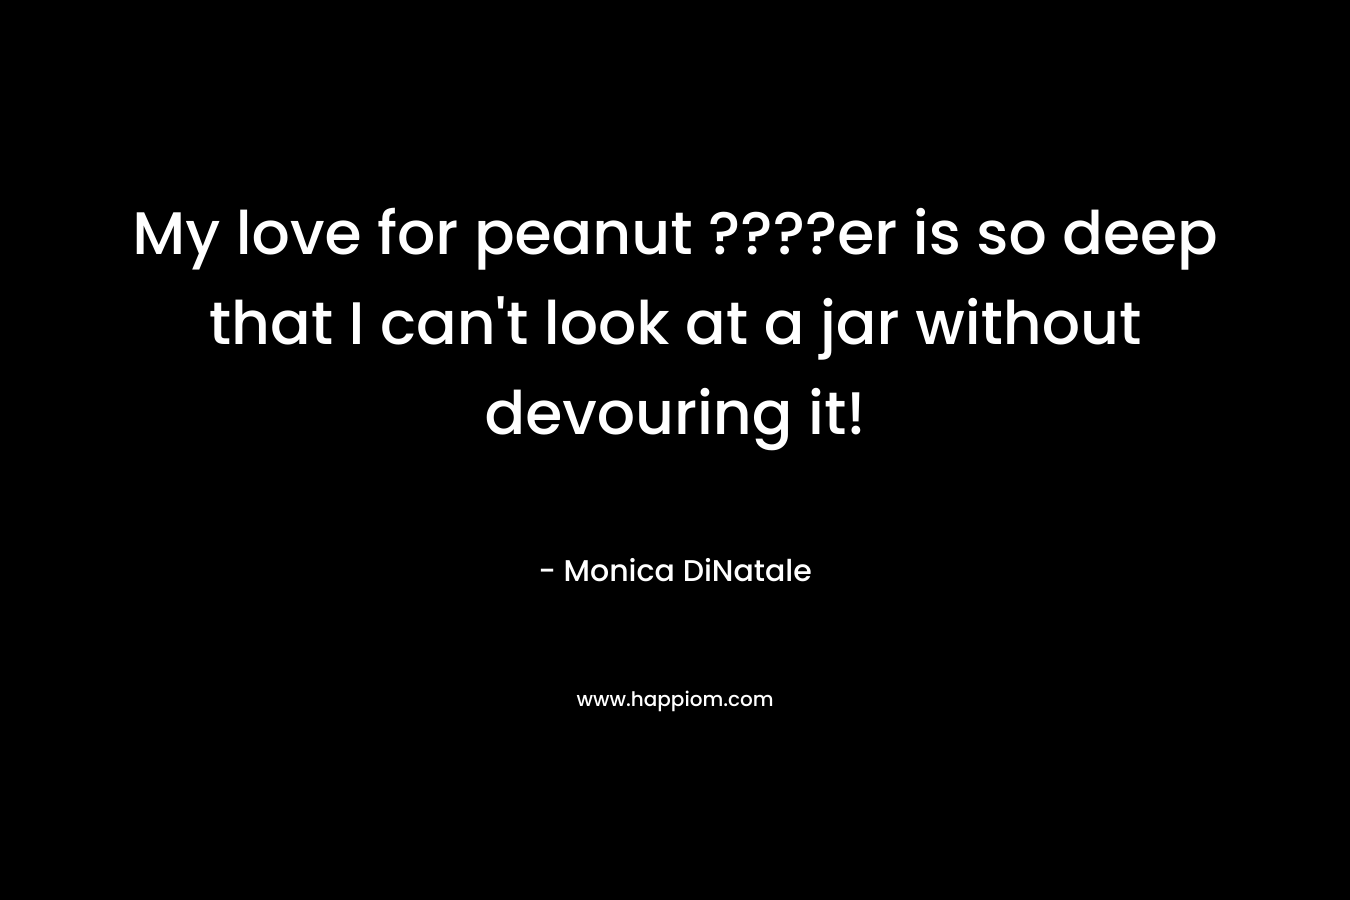 My love for peanut ????er is so deep that I can't look at a jar without devouring it!